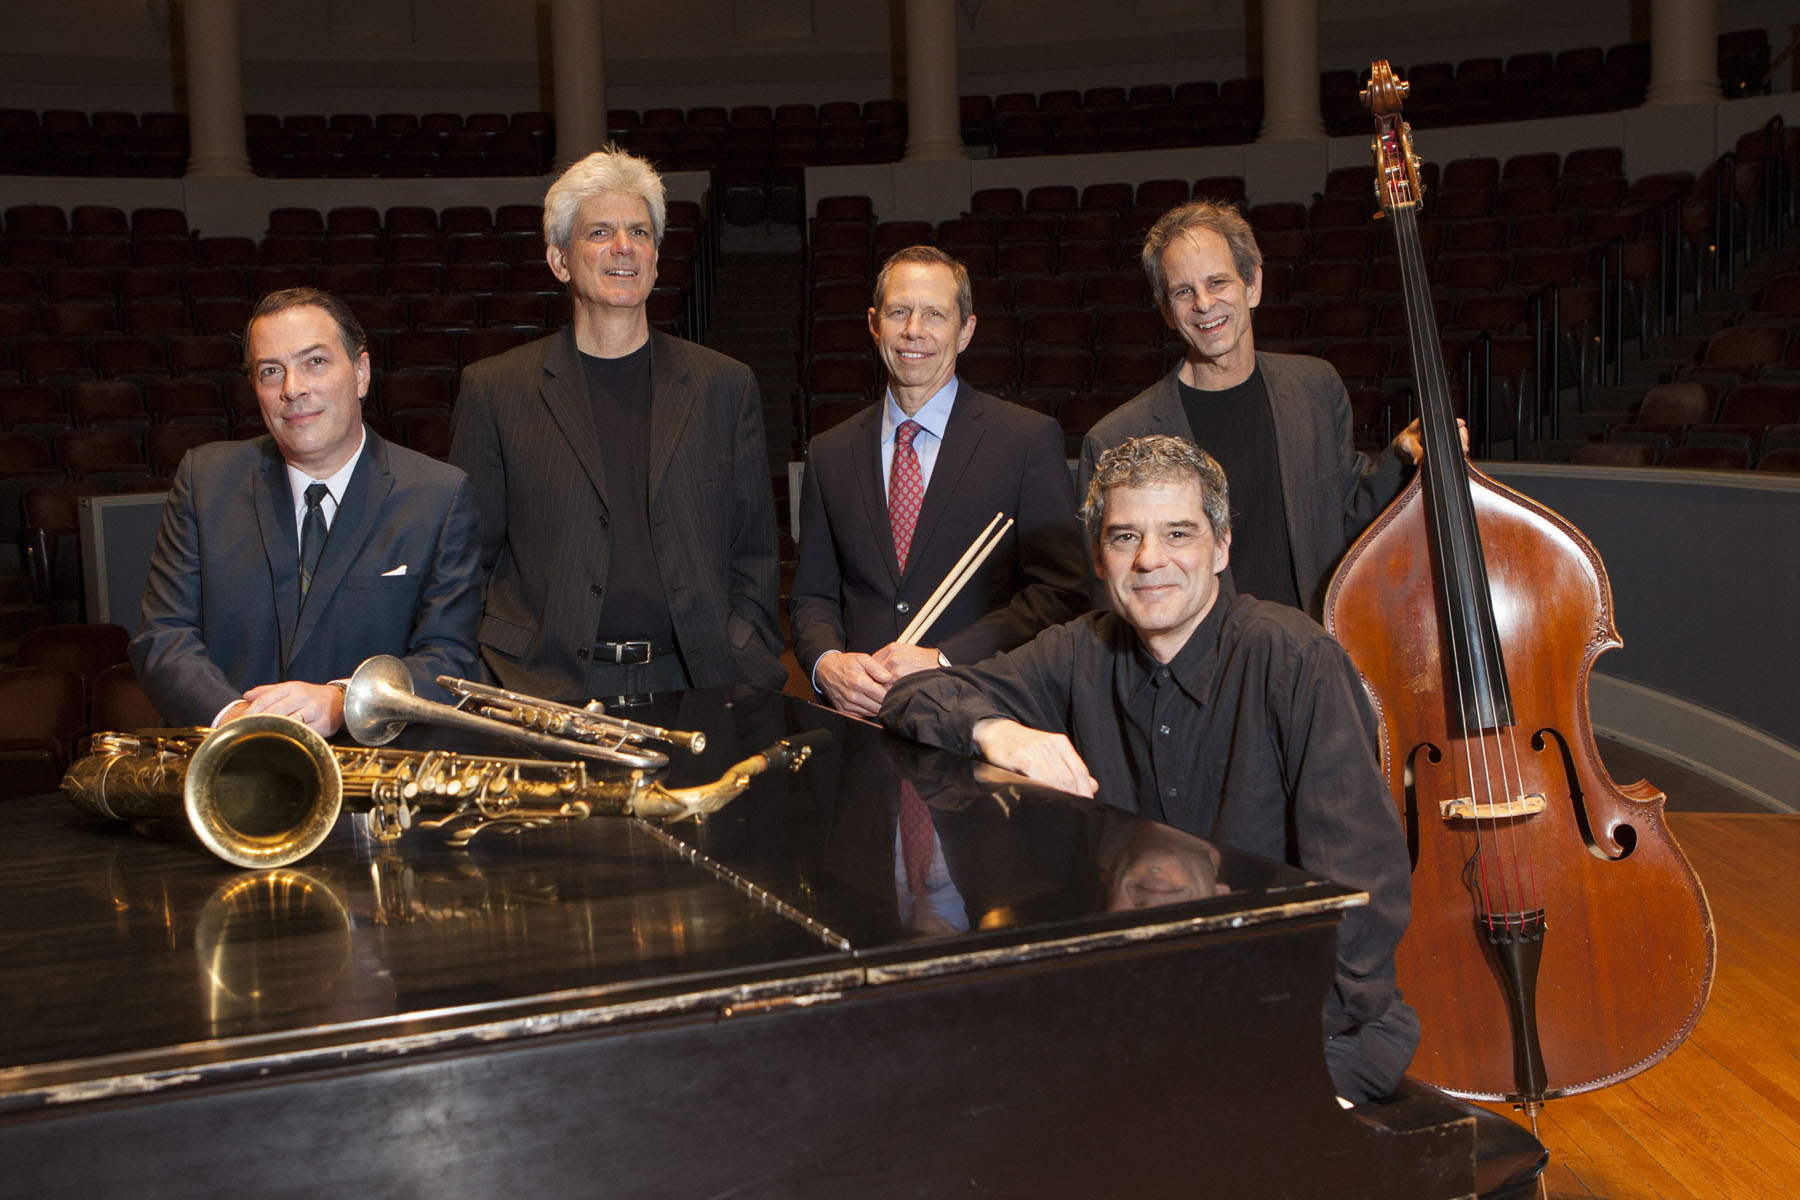 Free Bridge Quintet surround a piano while smiling at the camera for a group photo